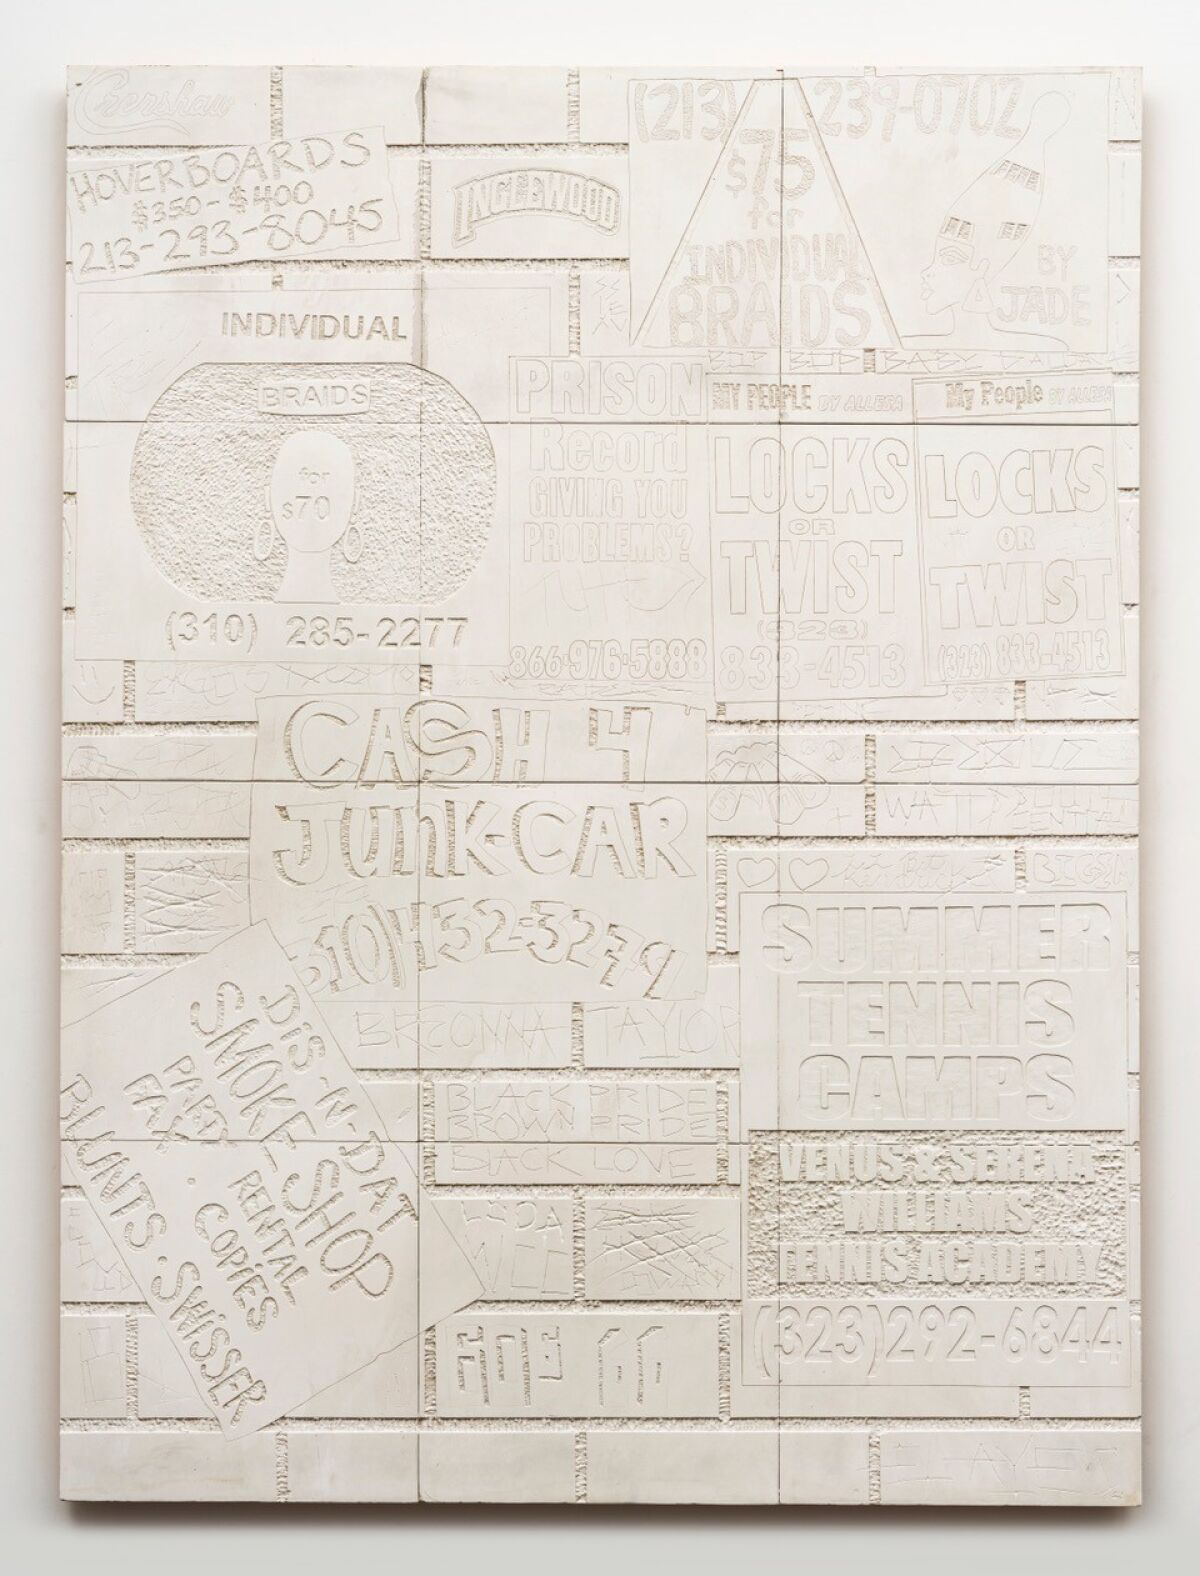 A monotone piece of work that resembles a wall covered in advertisements.